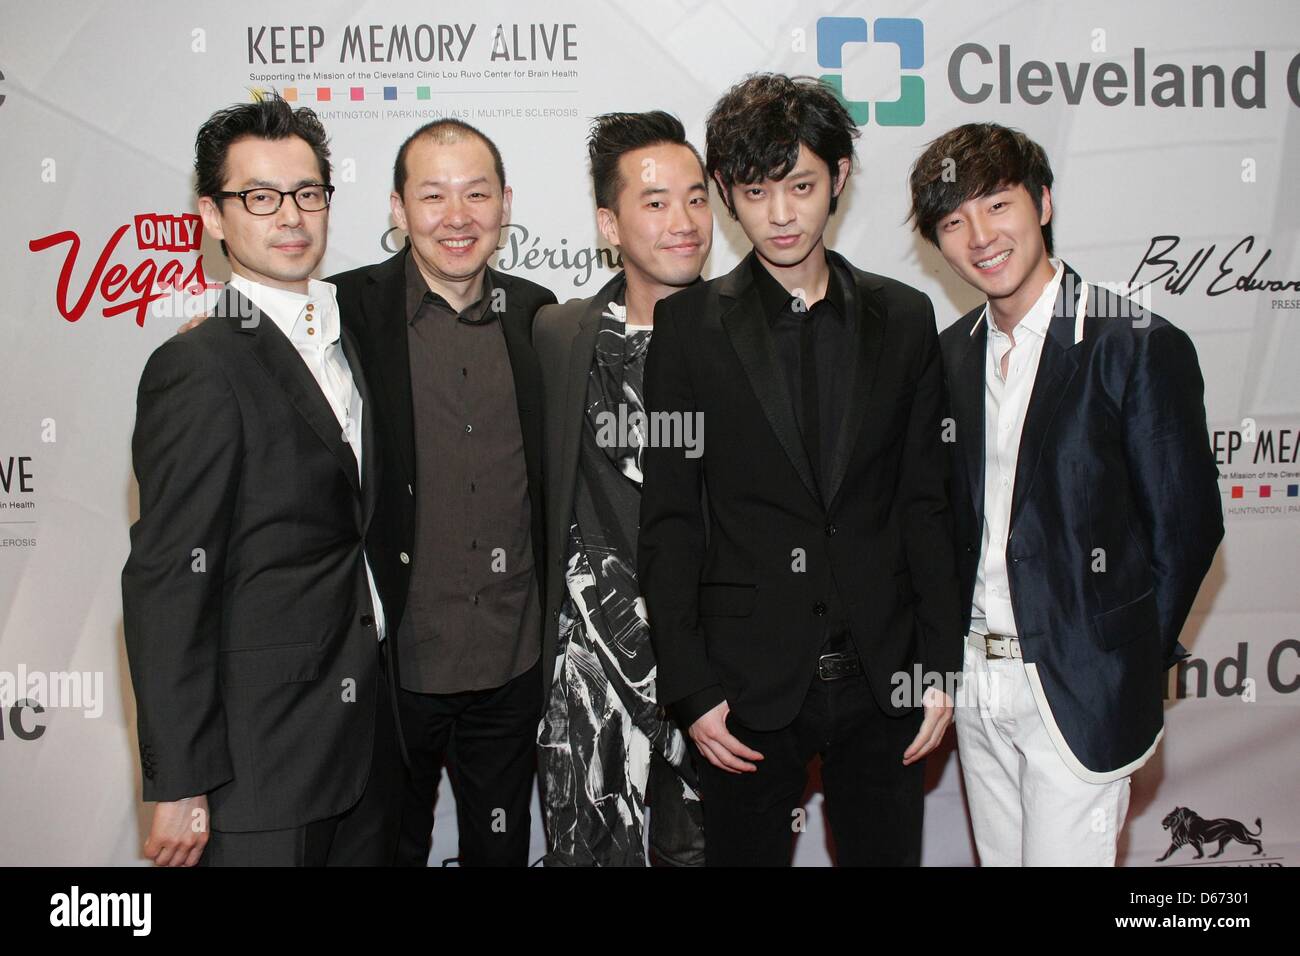 Las Vegas, US. 13 April 2013. John H. Lee, Won Young Chung, Jay, Jun Young Jung, Roy Kim at arrivals for Keep Memory Alive's 17th Annual Power of Love Gala, MGM Grand Garden Arena, Las Vegas. Photo By: James Atoa/Everett Collection/Alamy Live News Stock Photo